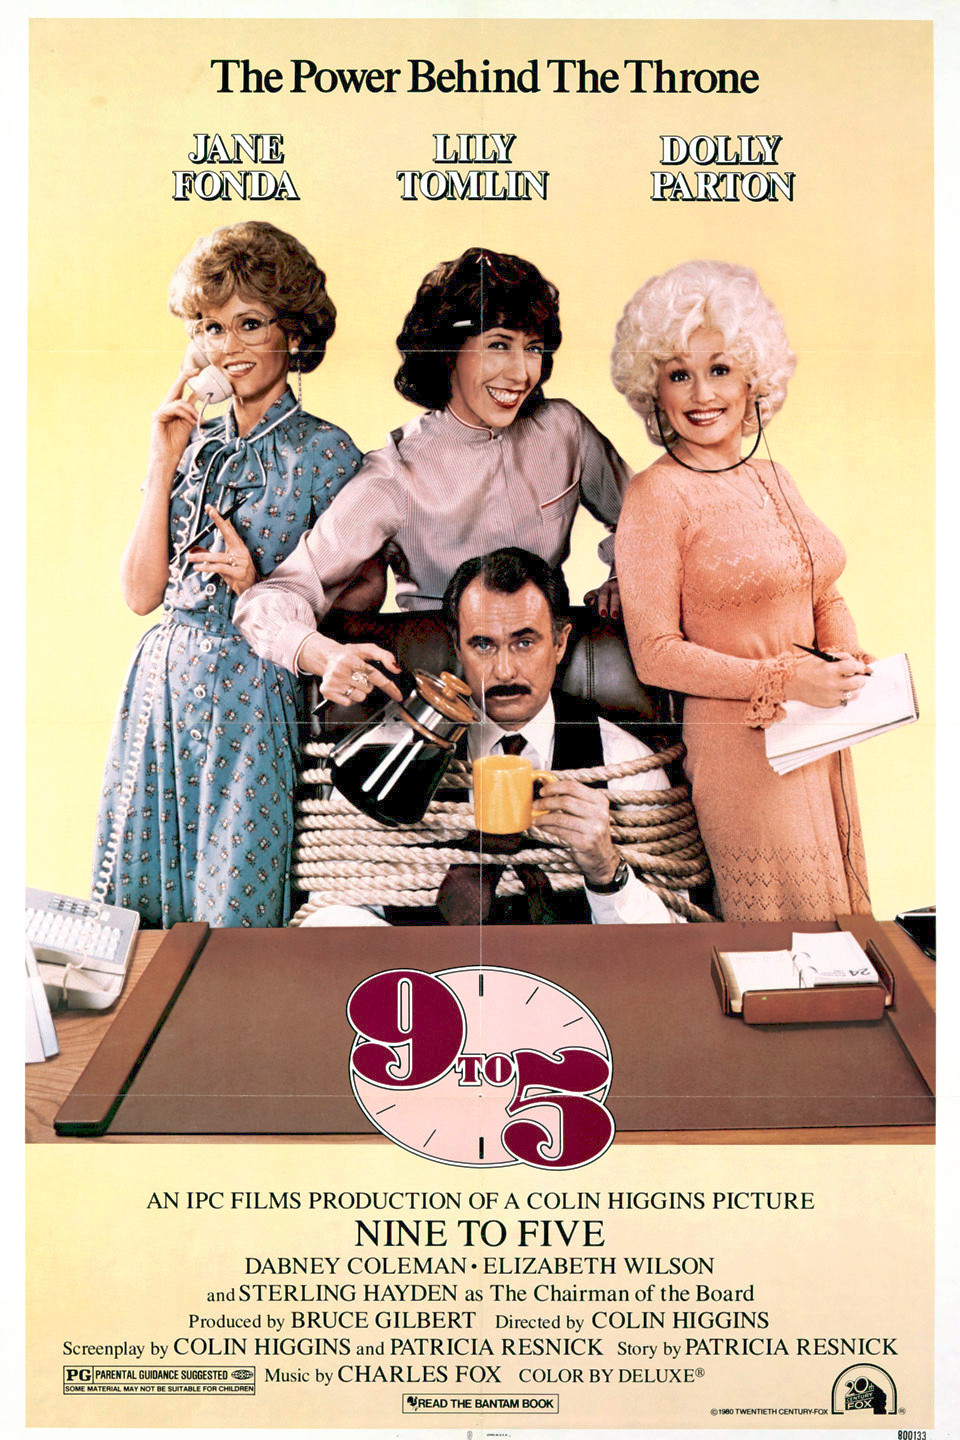 9 to 5 - 1980